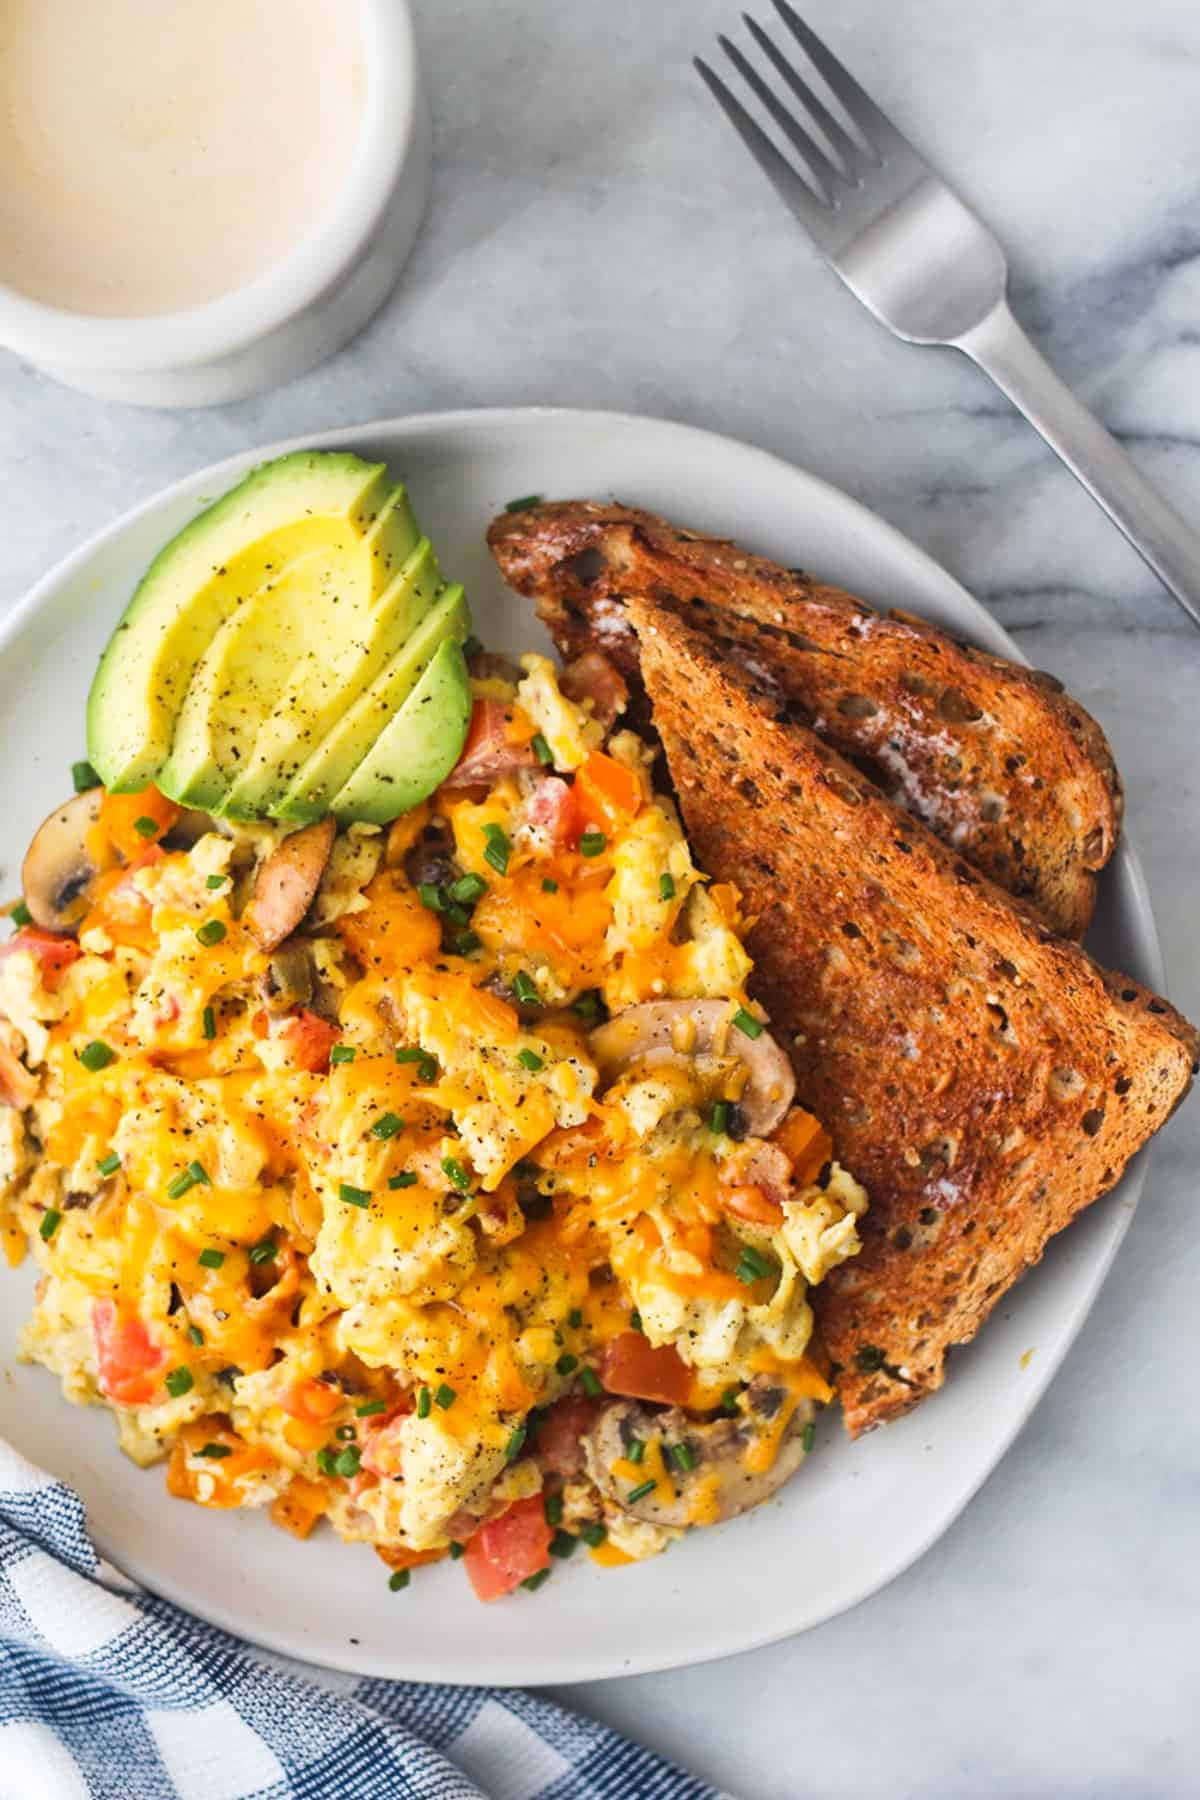 Start your day with delicious and healthy scrambled eggs!